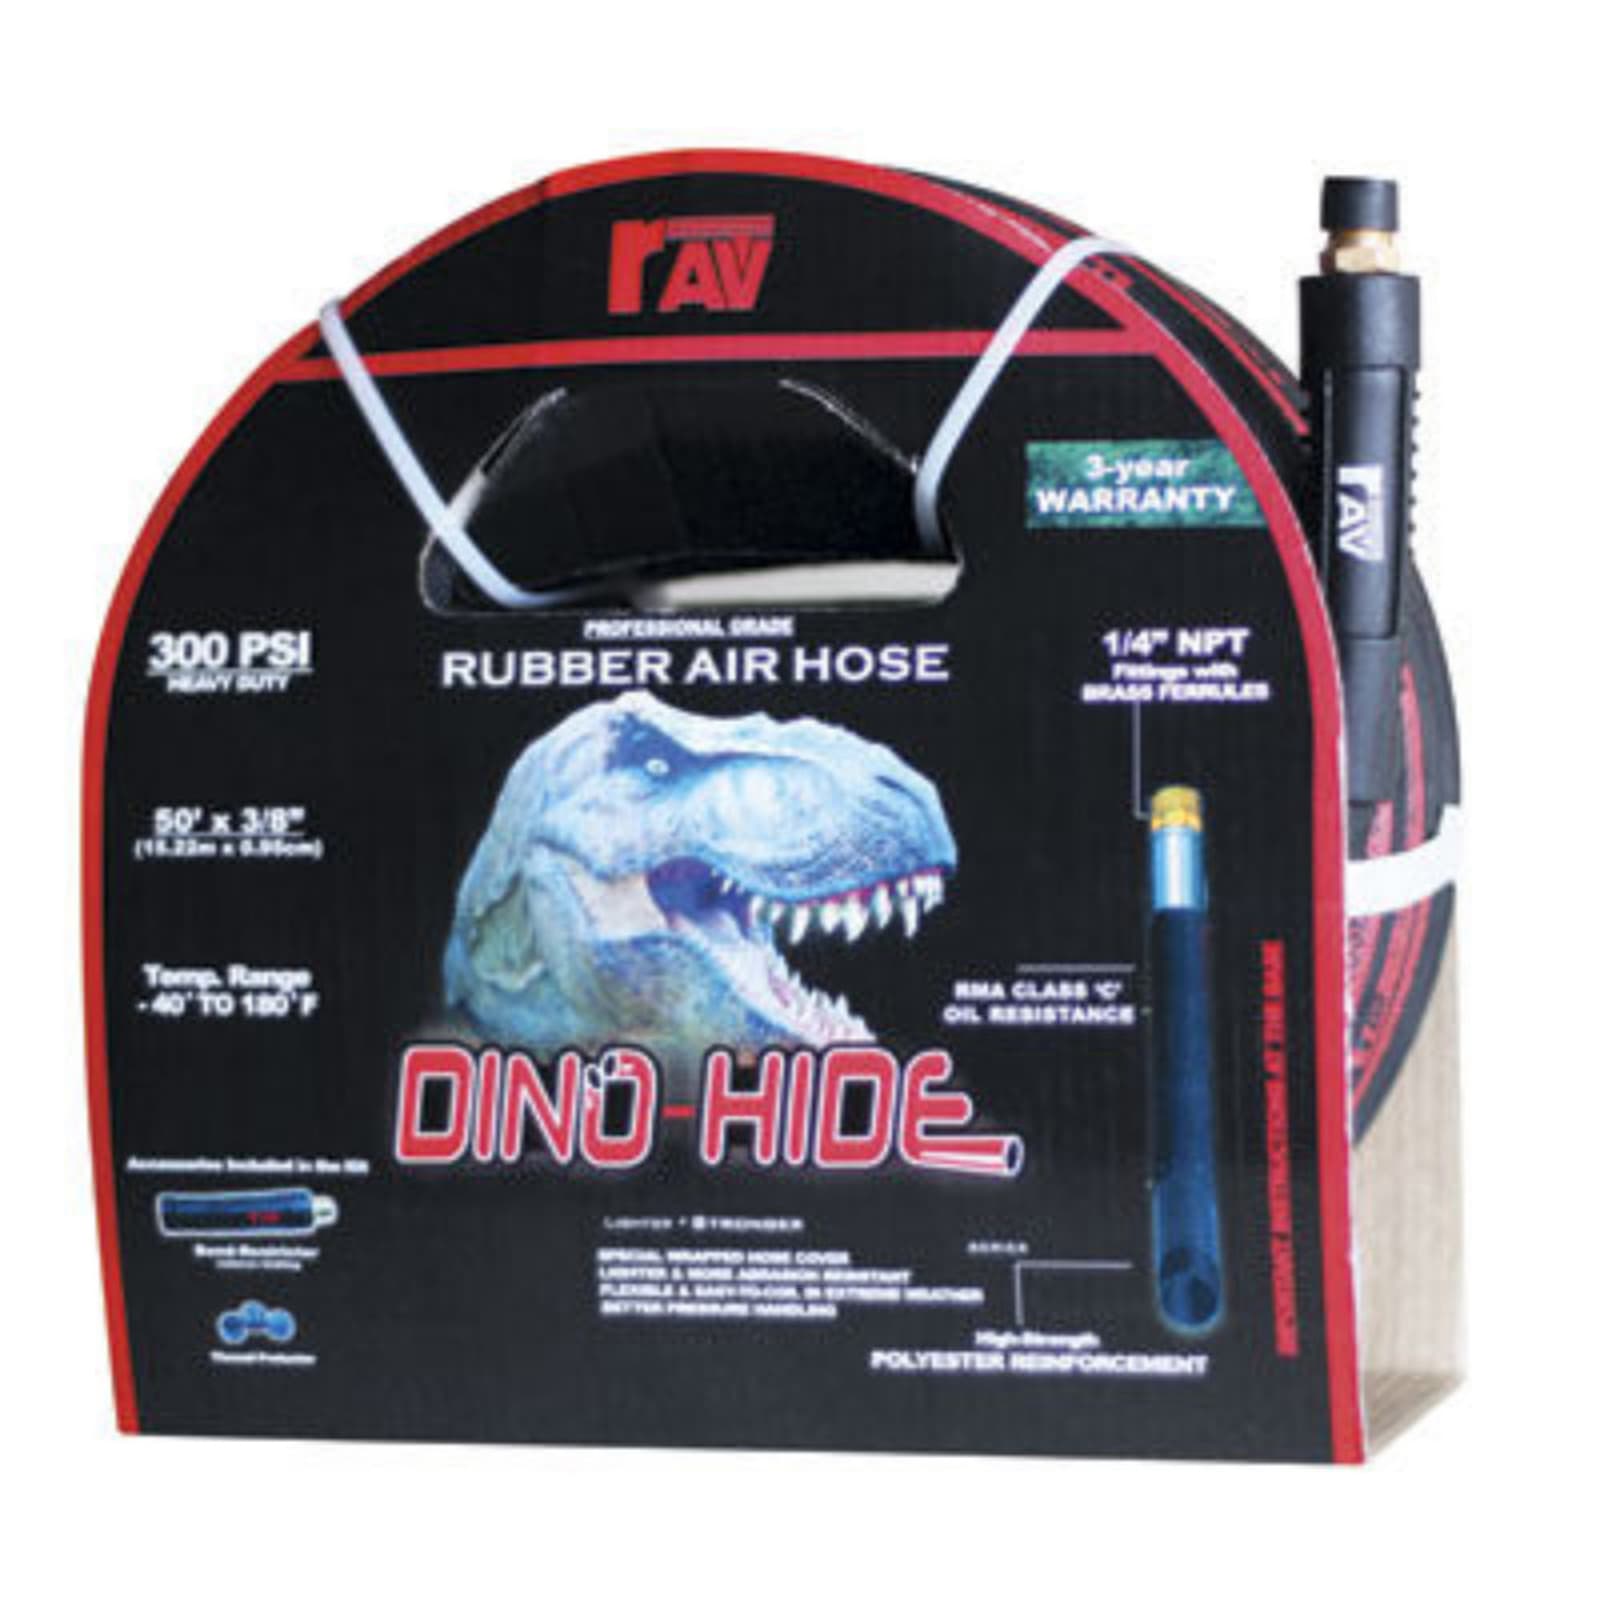 Dino-Hide Rubber Air Hose - 3/8 In. x 50 Ft. by Dino-Hide at Fleet